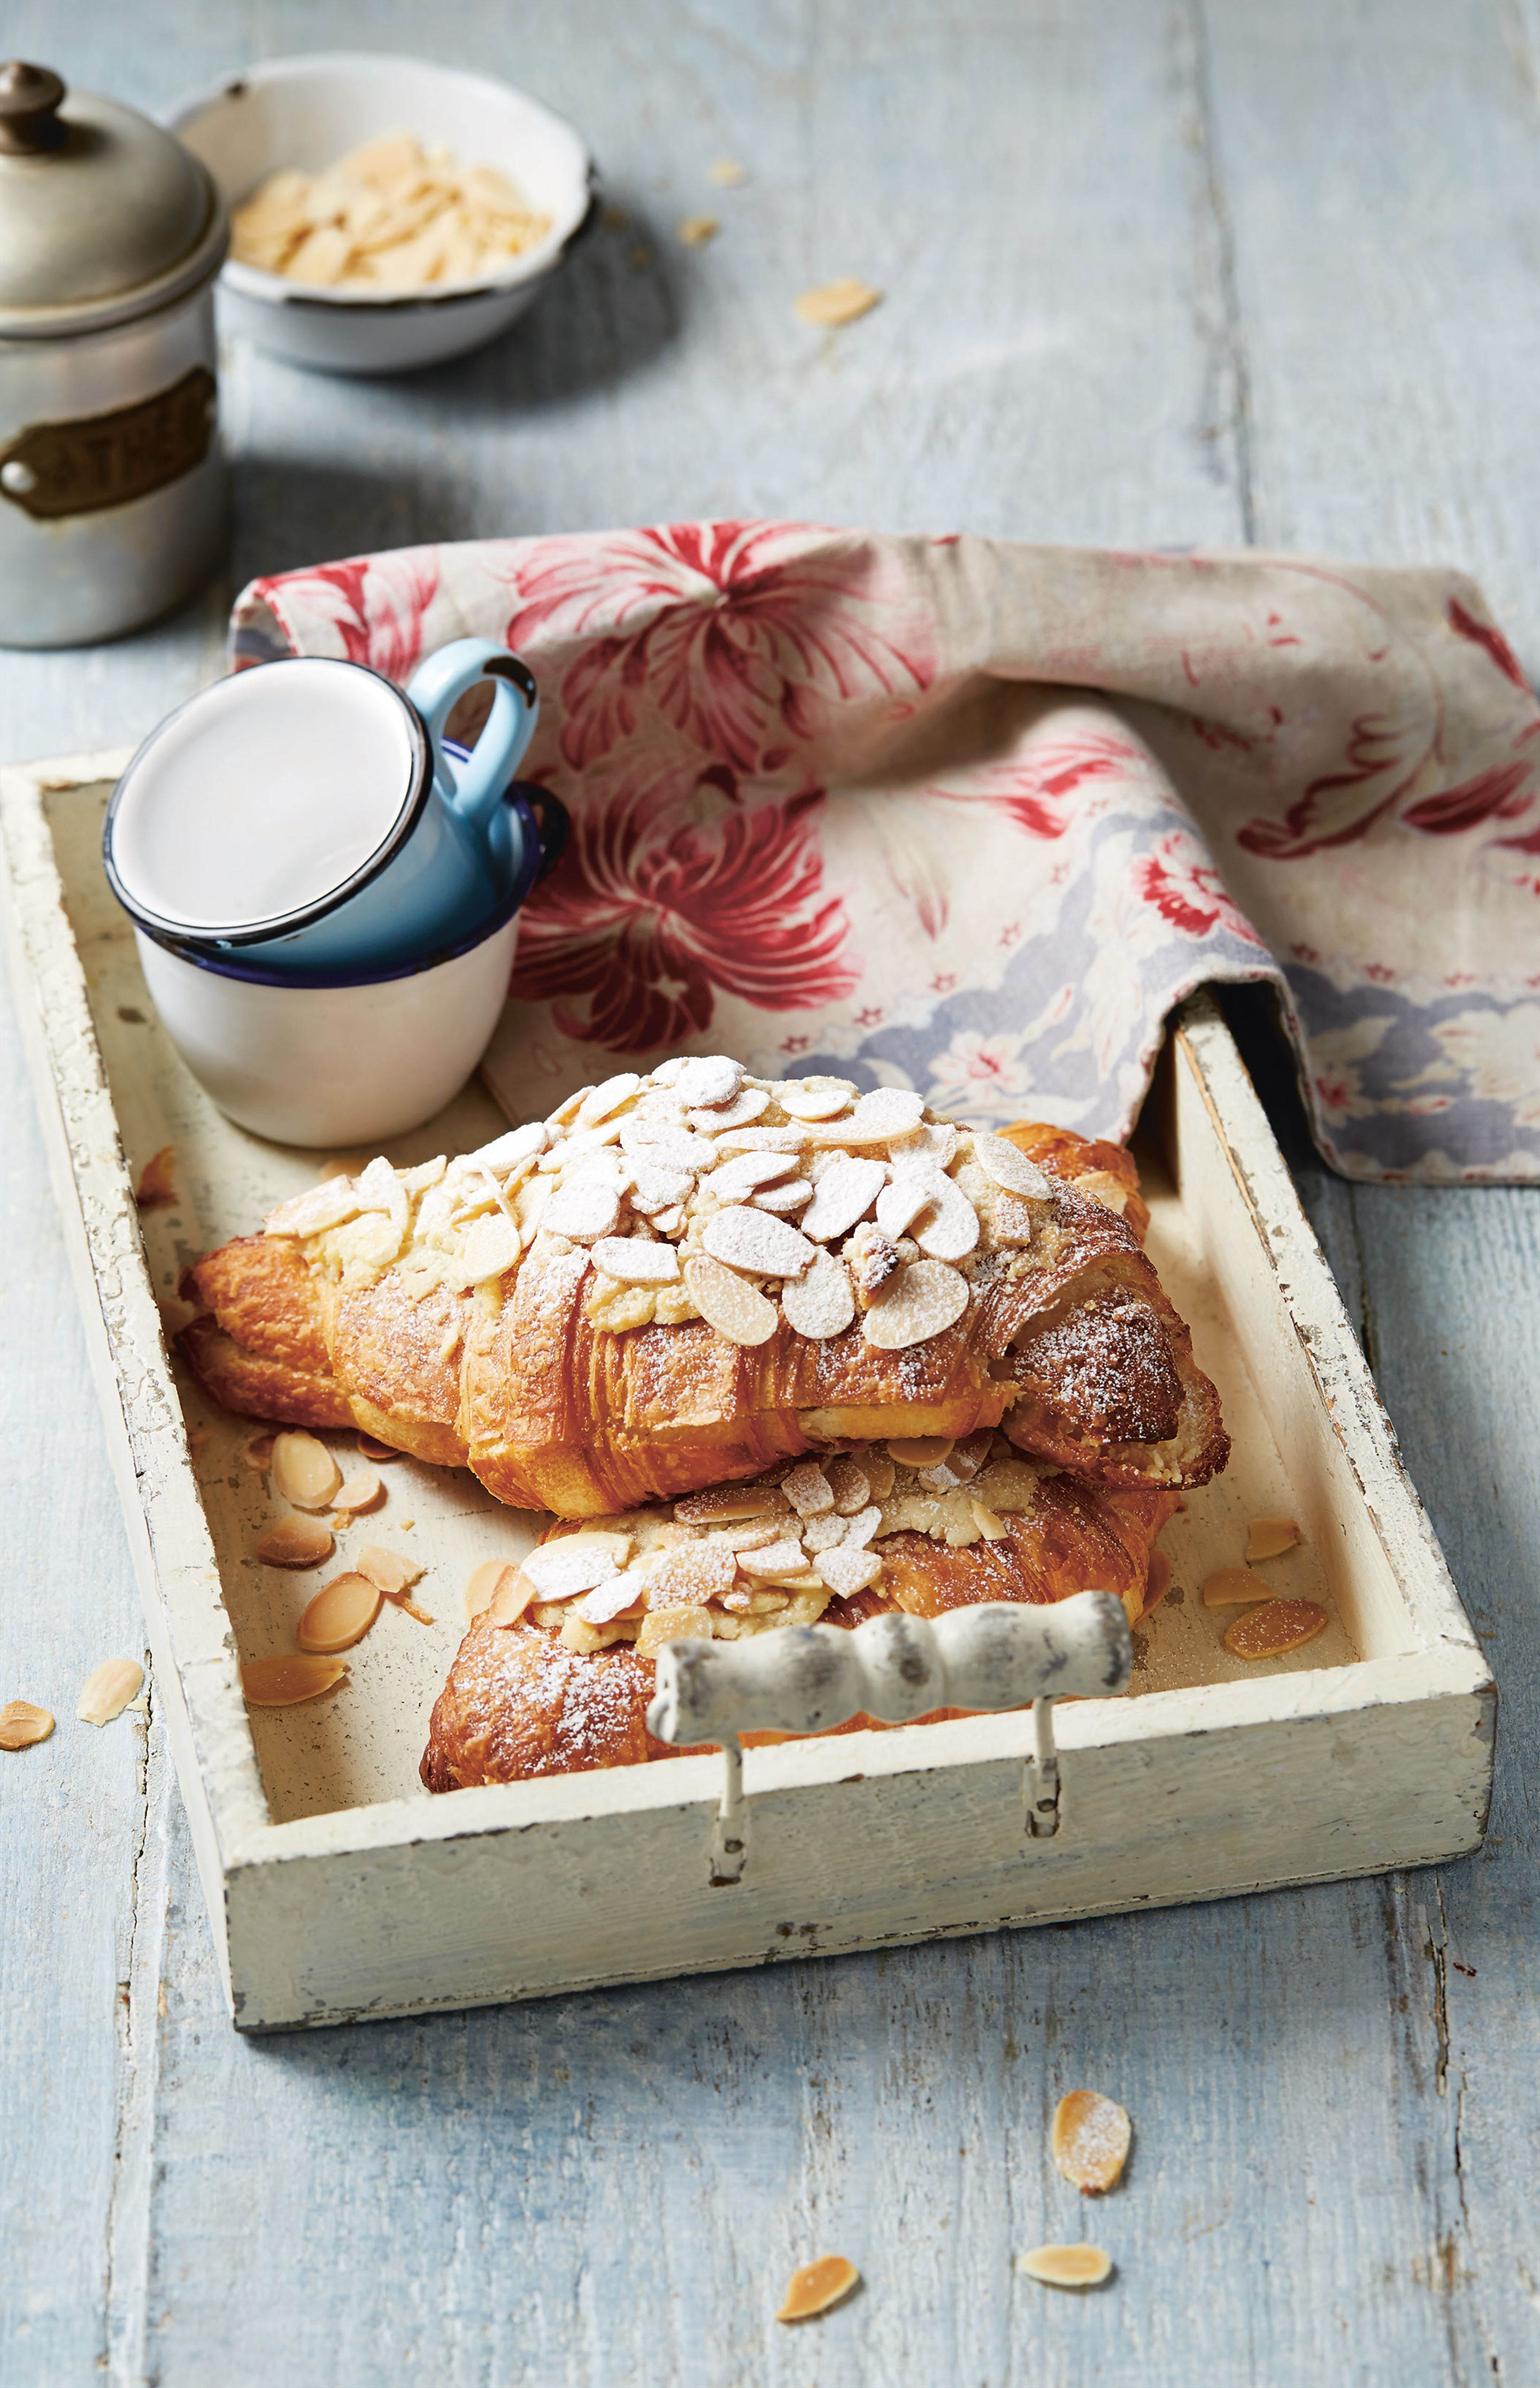 Almond croissants made easy